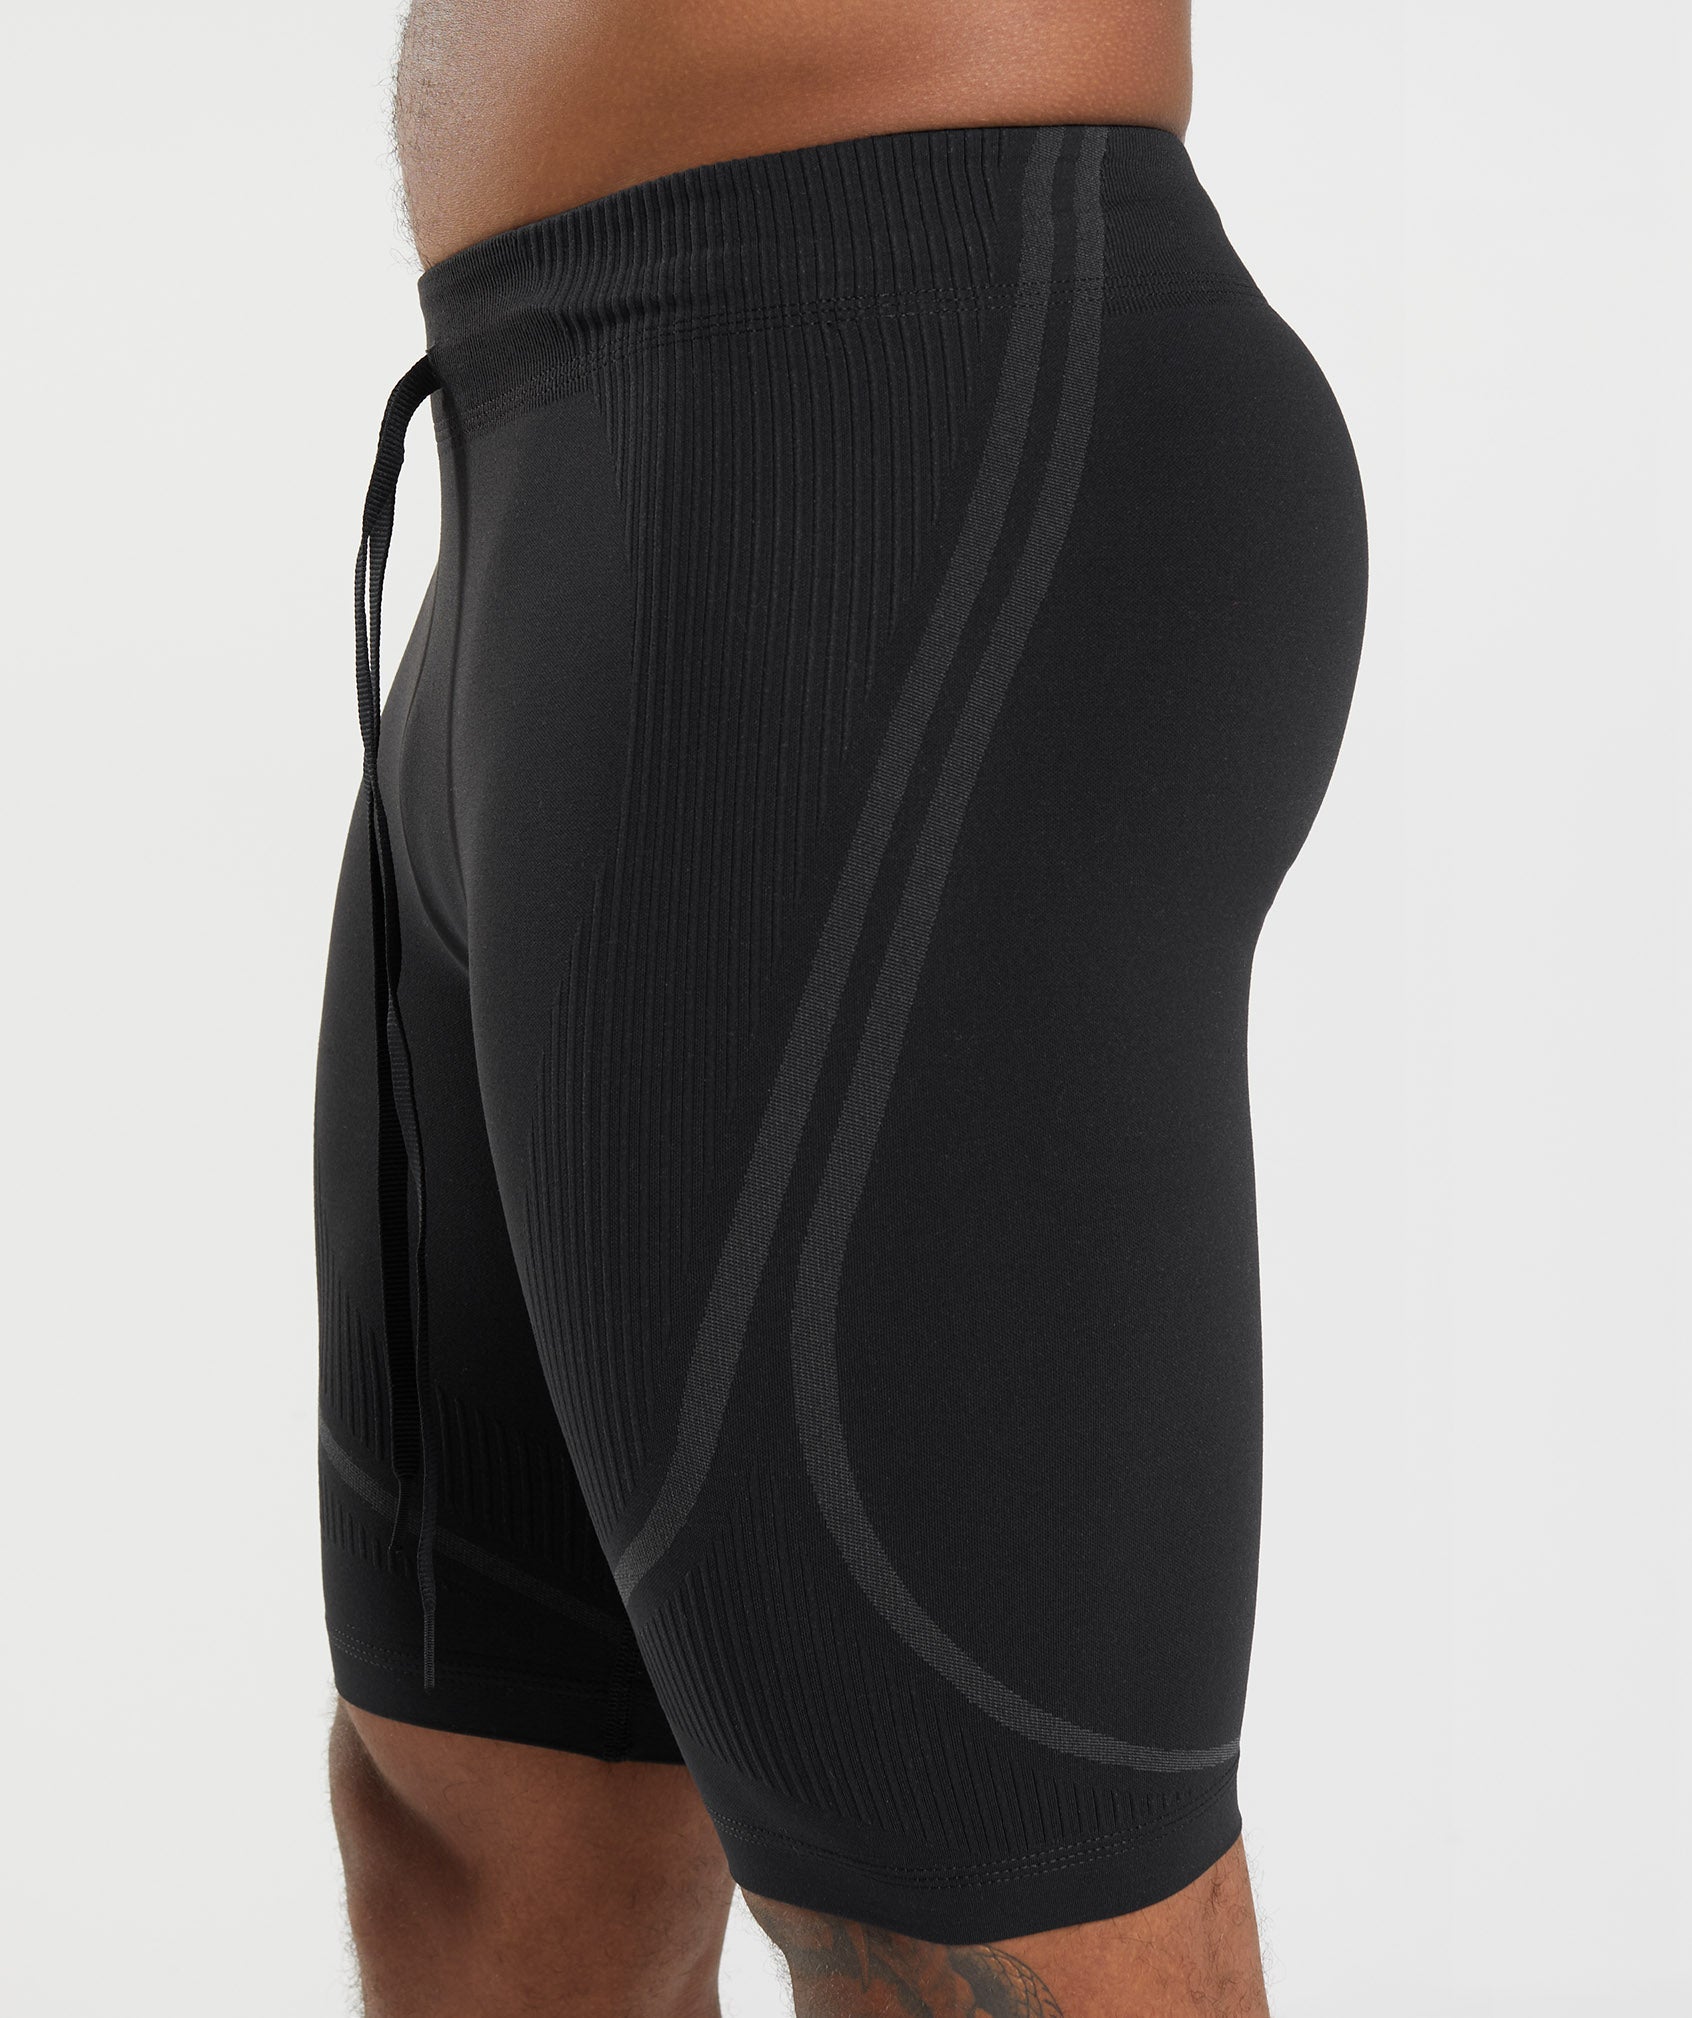 315 Seamless 1/2 Shorts in Black/Charcoal Grey - view 6